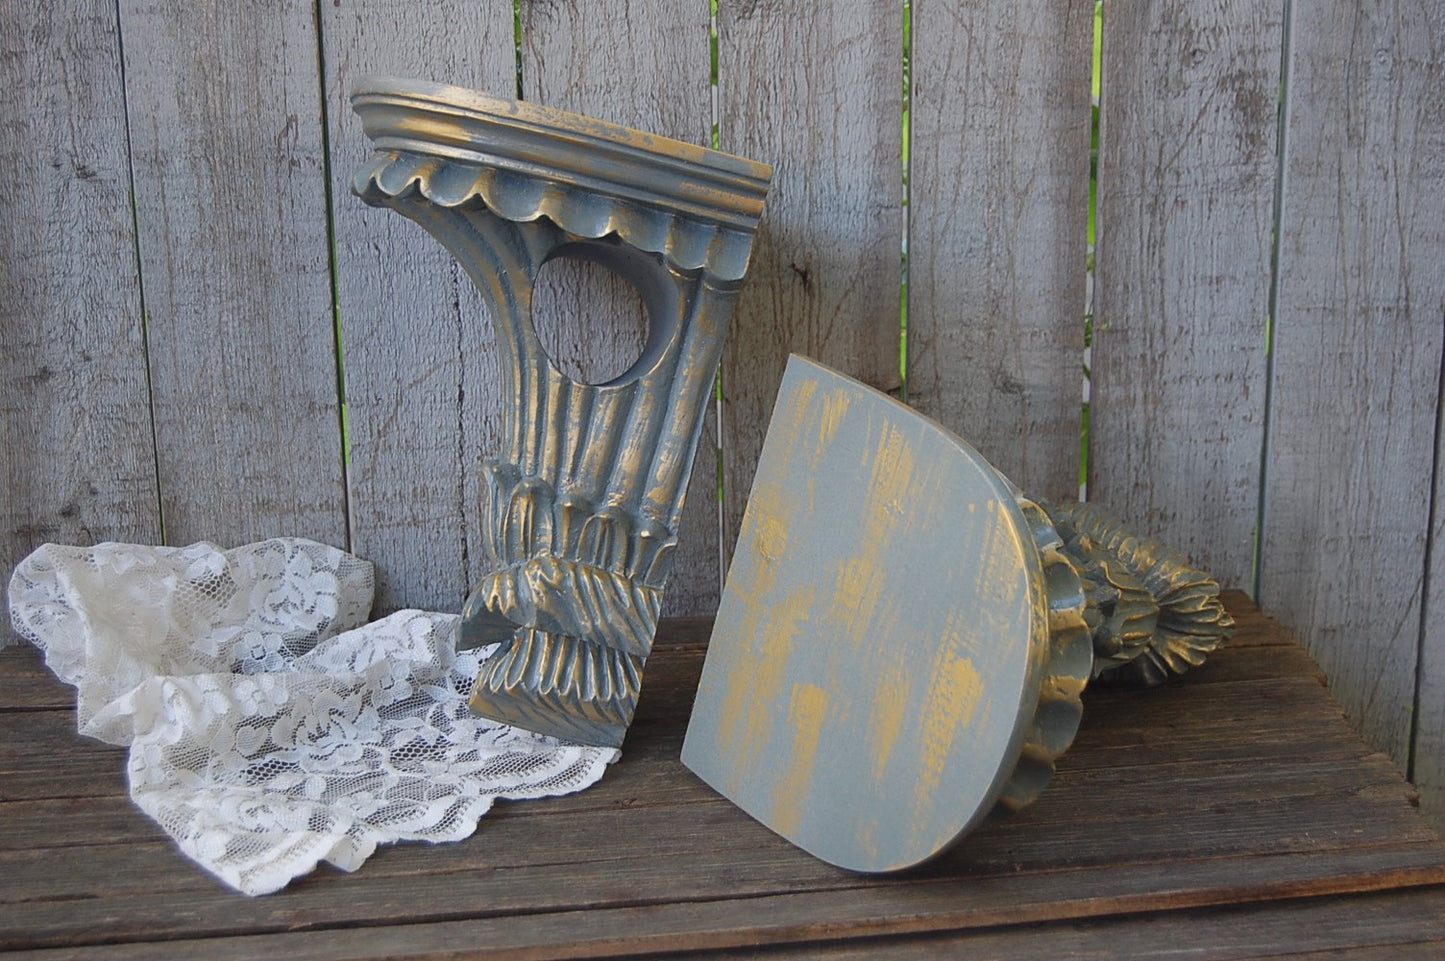 Grey & gold drapery sconces - The Vintage Artistry